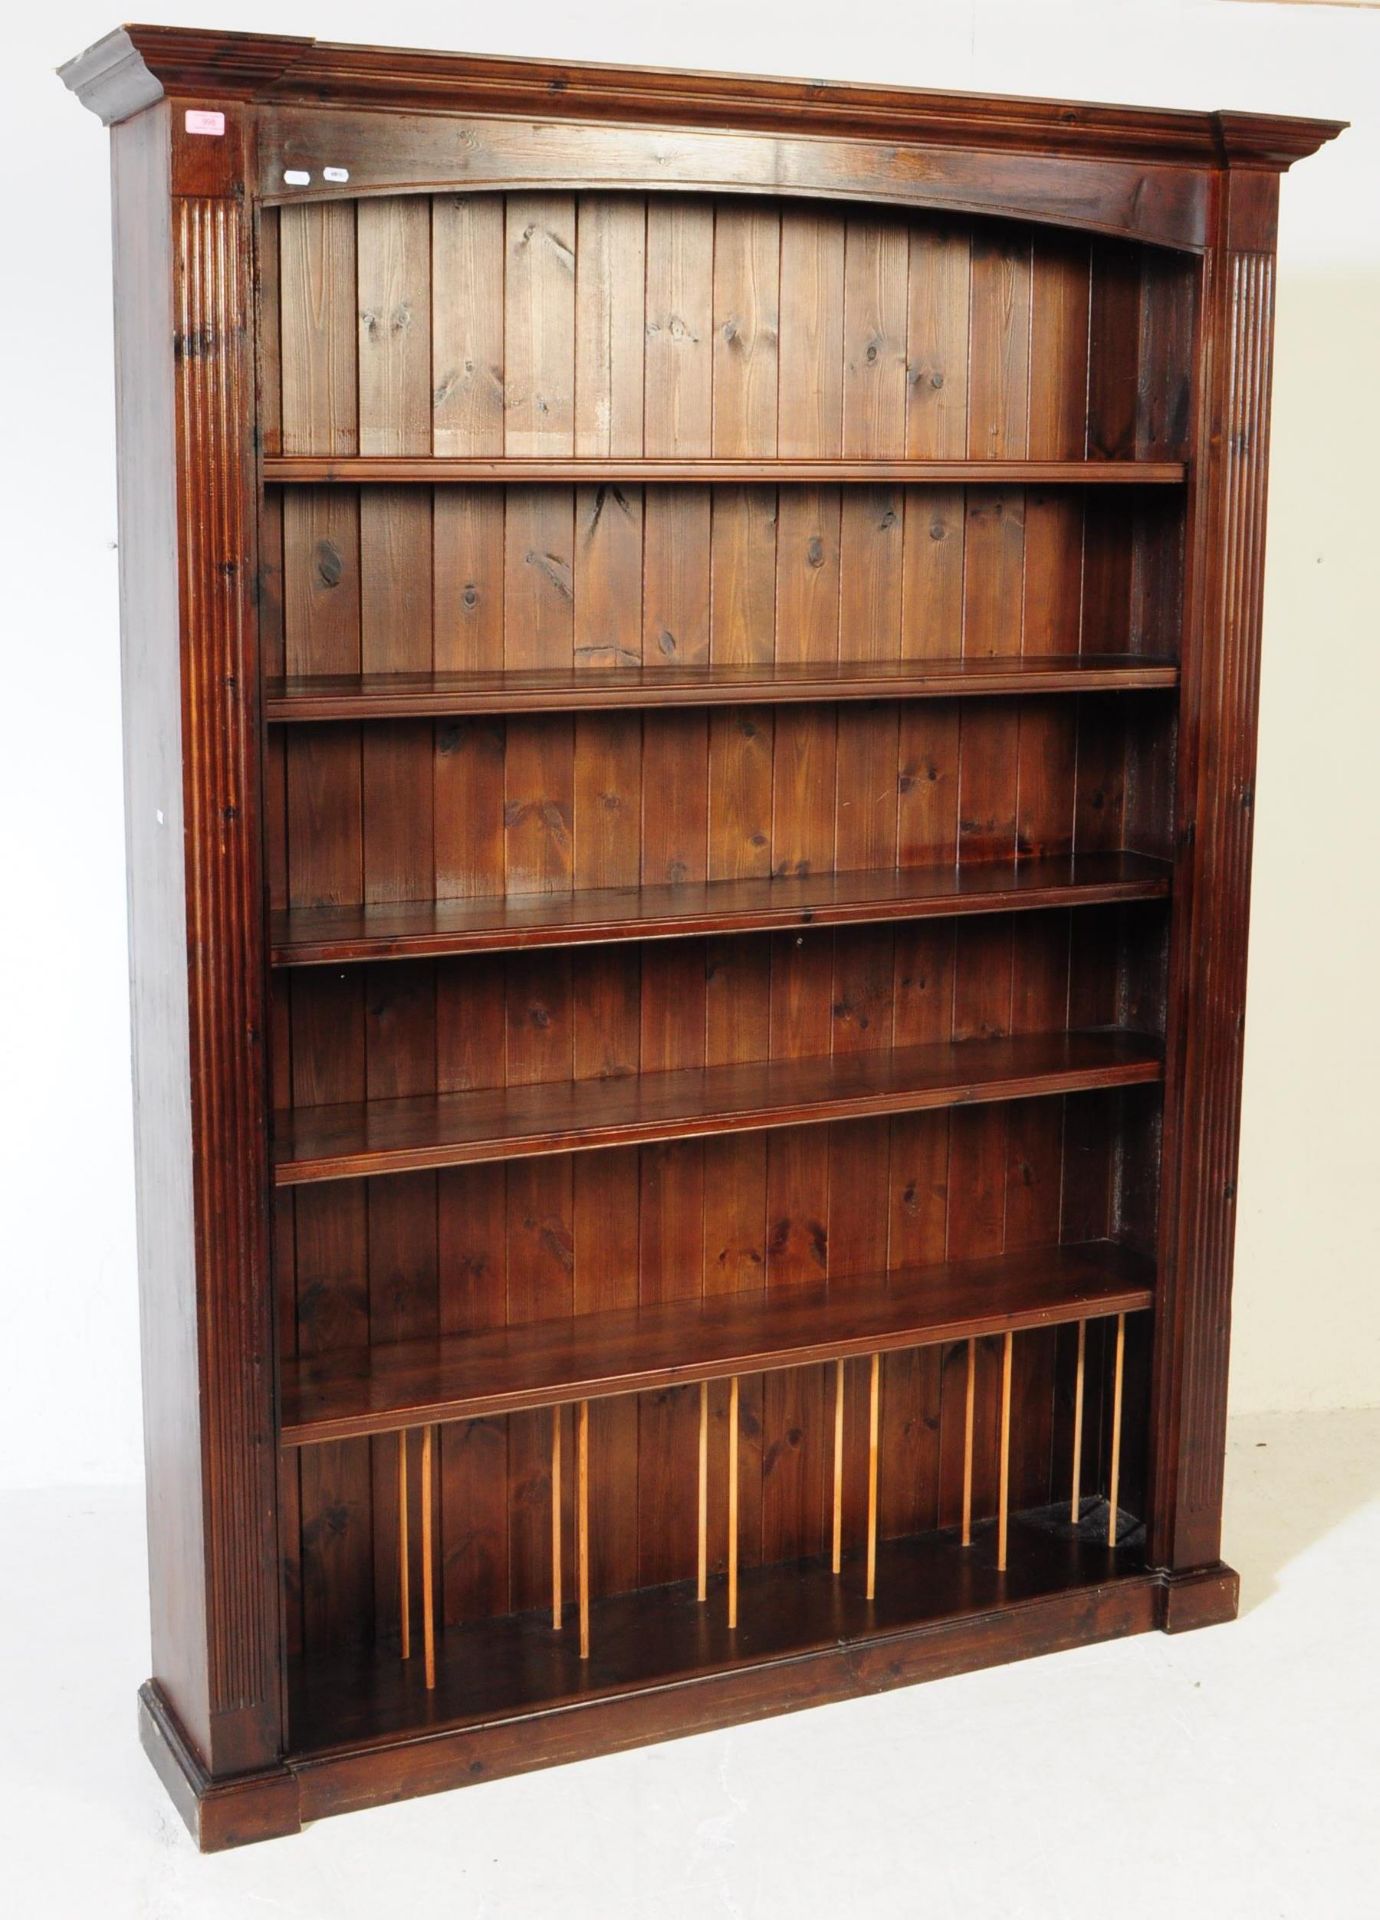 LARGE UPRIGHT VICTORIAN STYLE OPEN FRONT BOOKCASE - Image 2 of 6